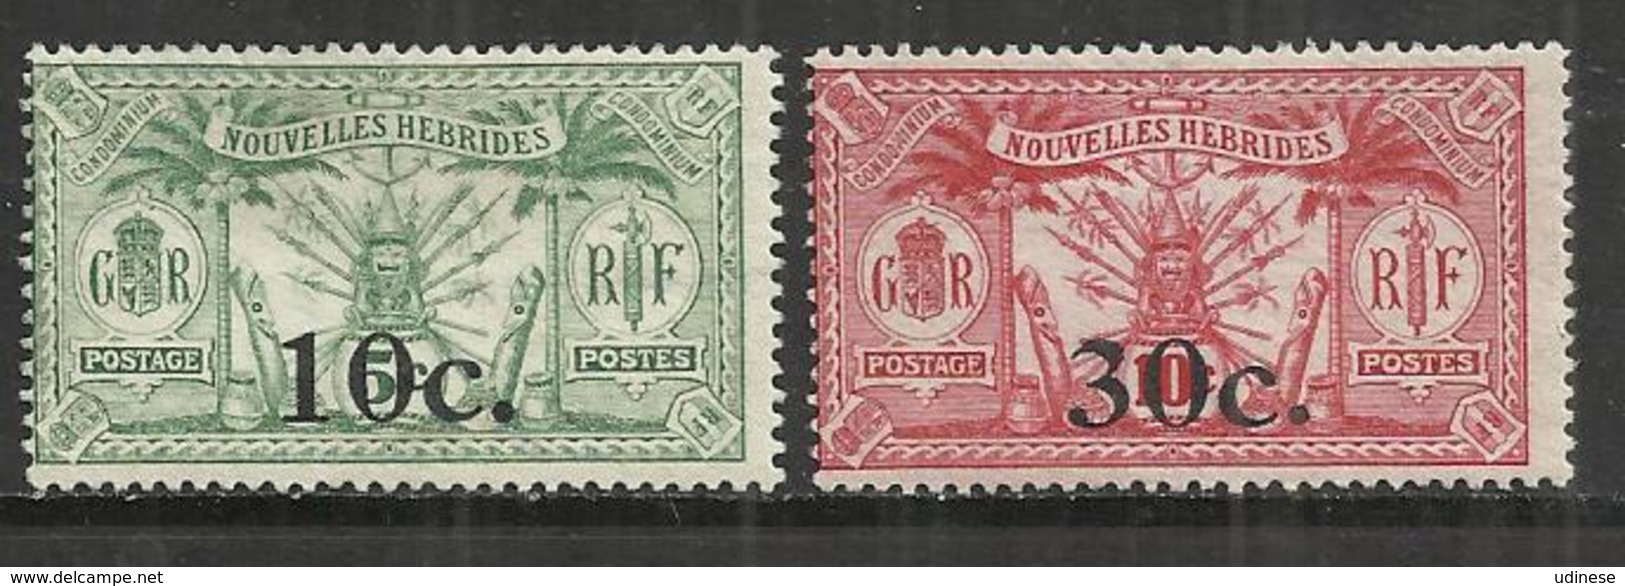 NOUVELLE HEBRIDES 1920 - INDIGENOUS IDOL - OVERPRINTED -  LOT OF 2 DIFFERENT - MNH NEUF MINT NUEVO - Nuevos